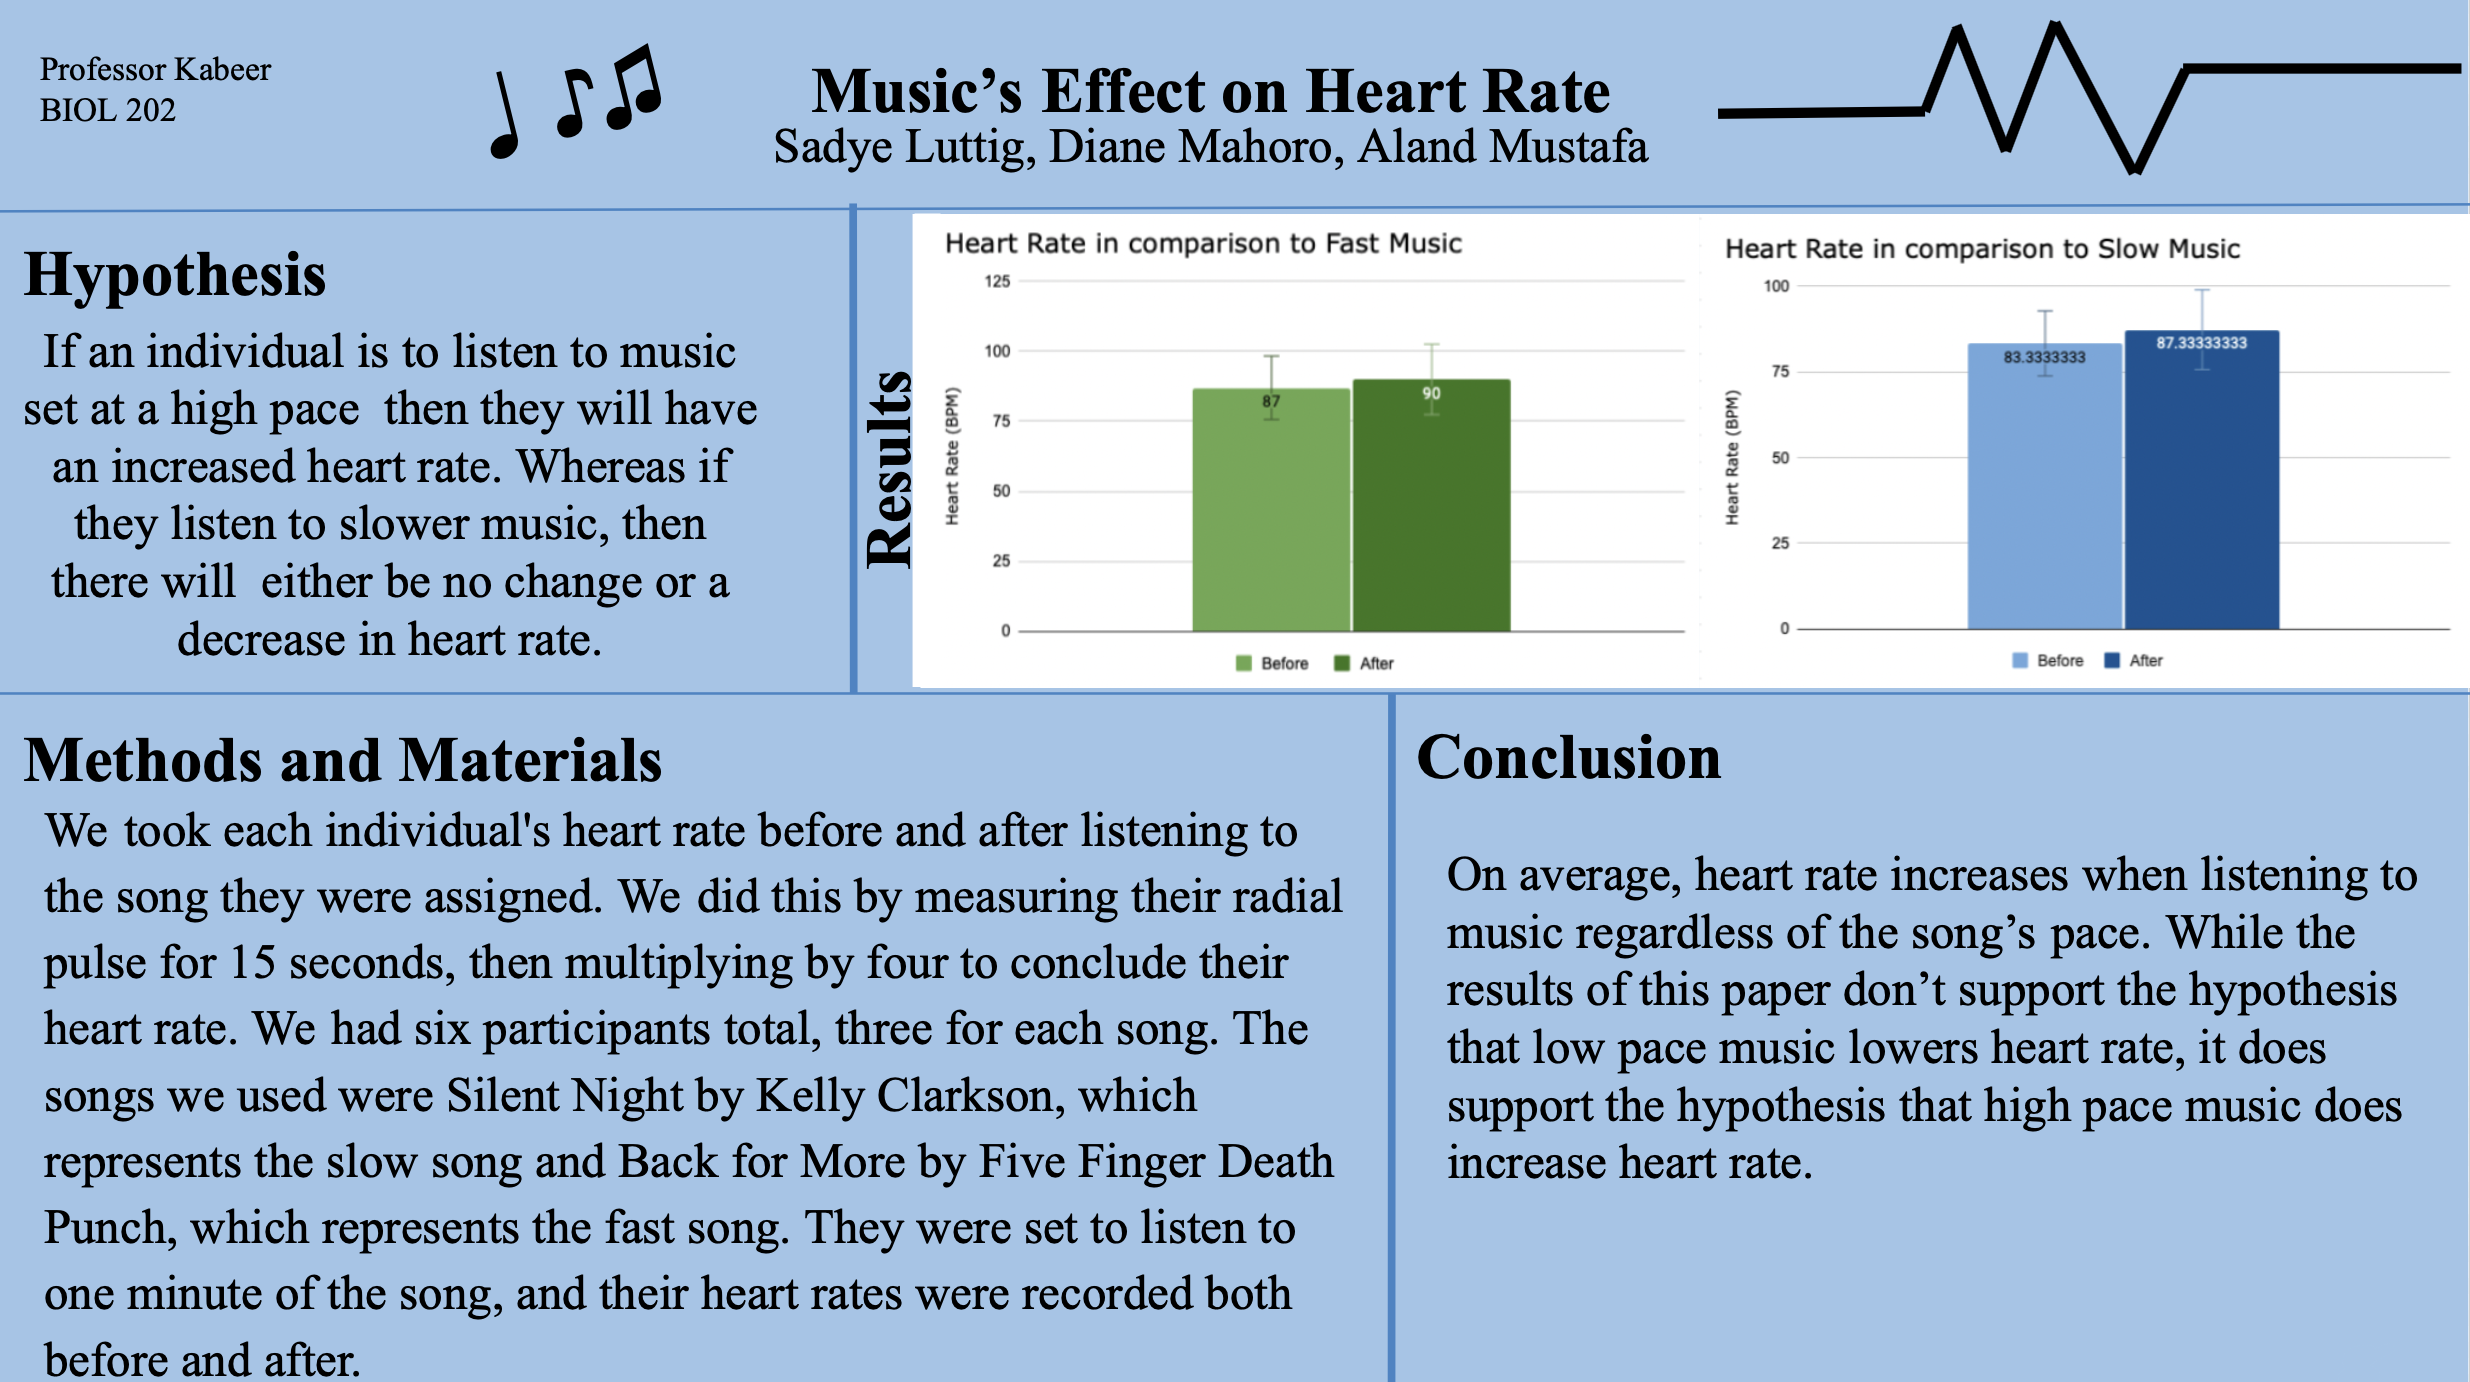 Poster about Music's Effect on Heart Rate